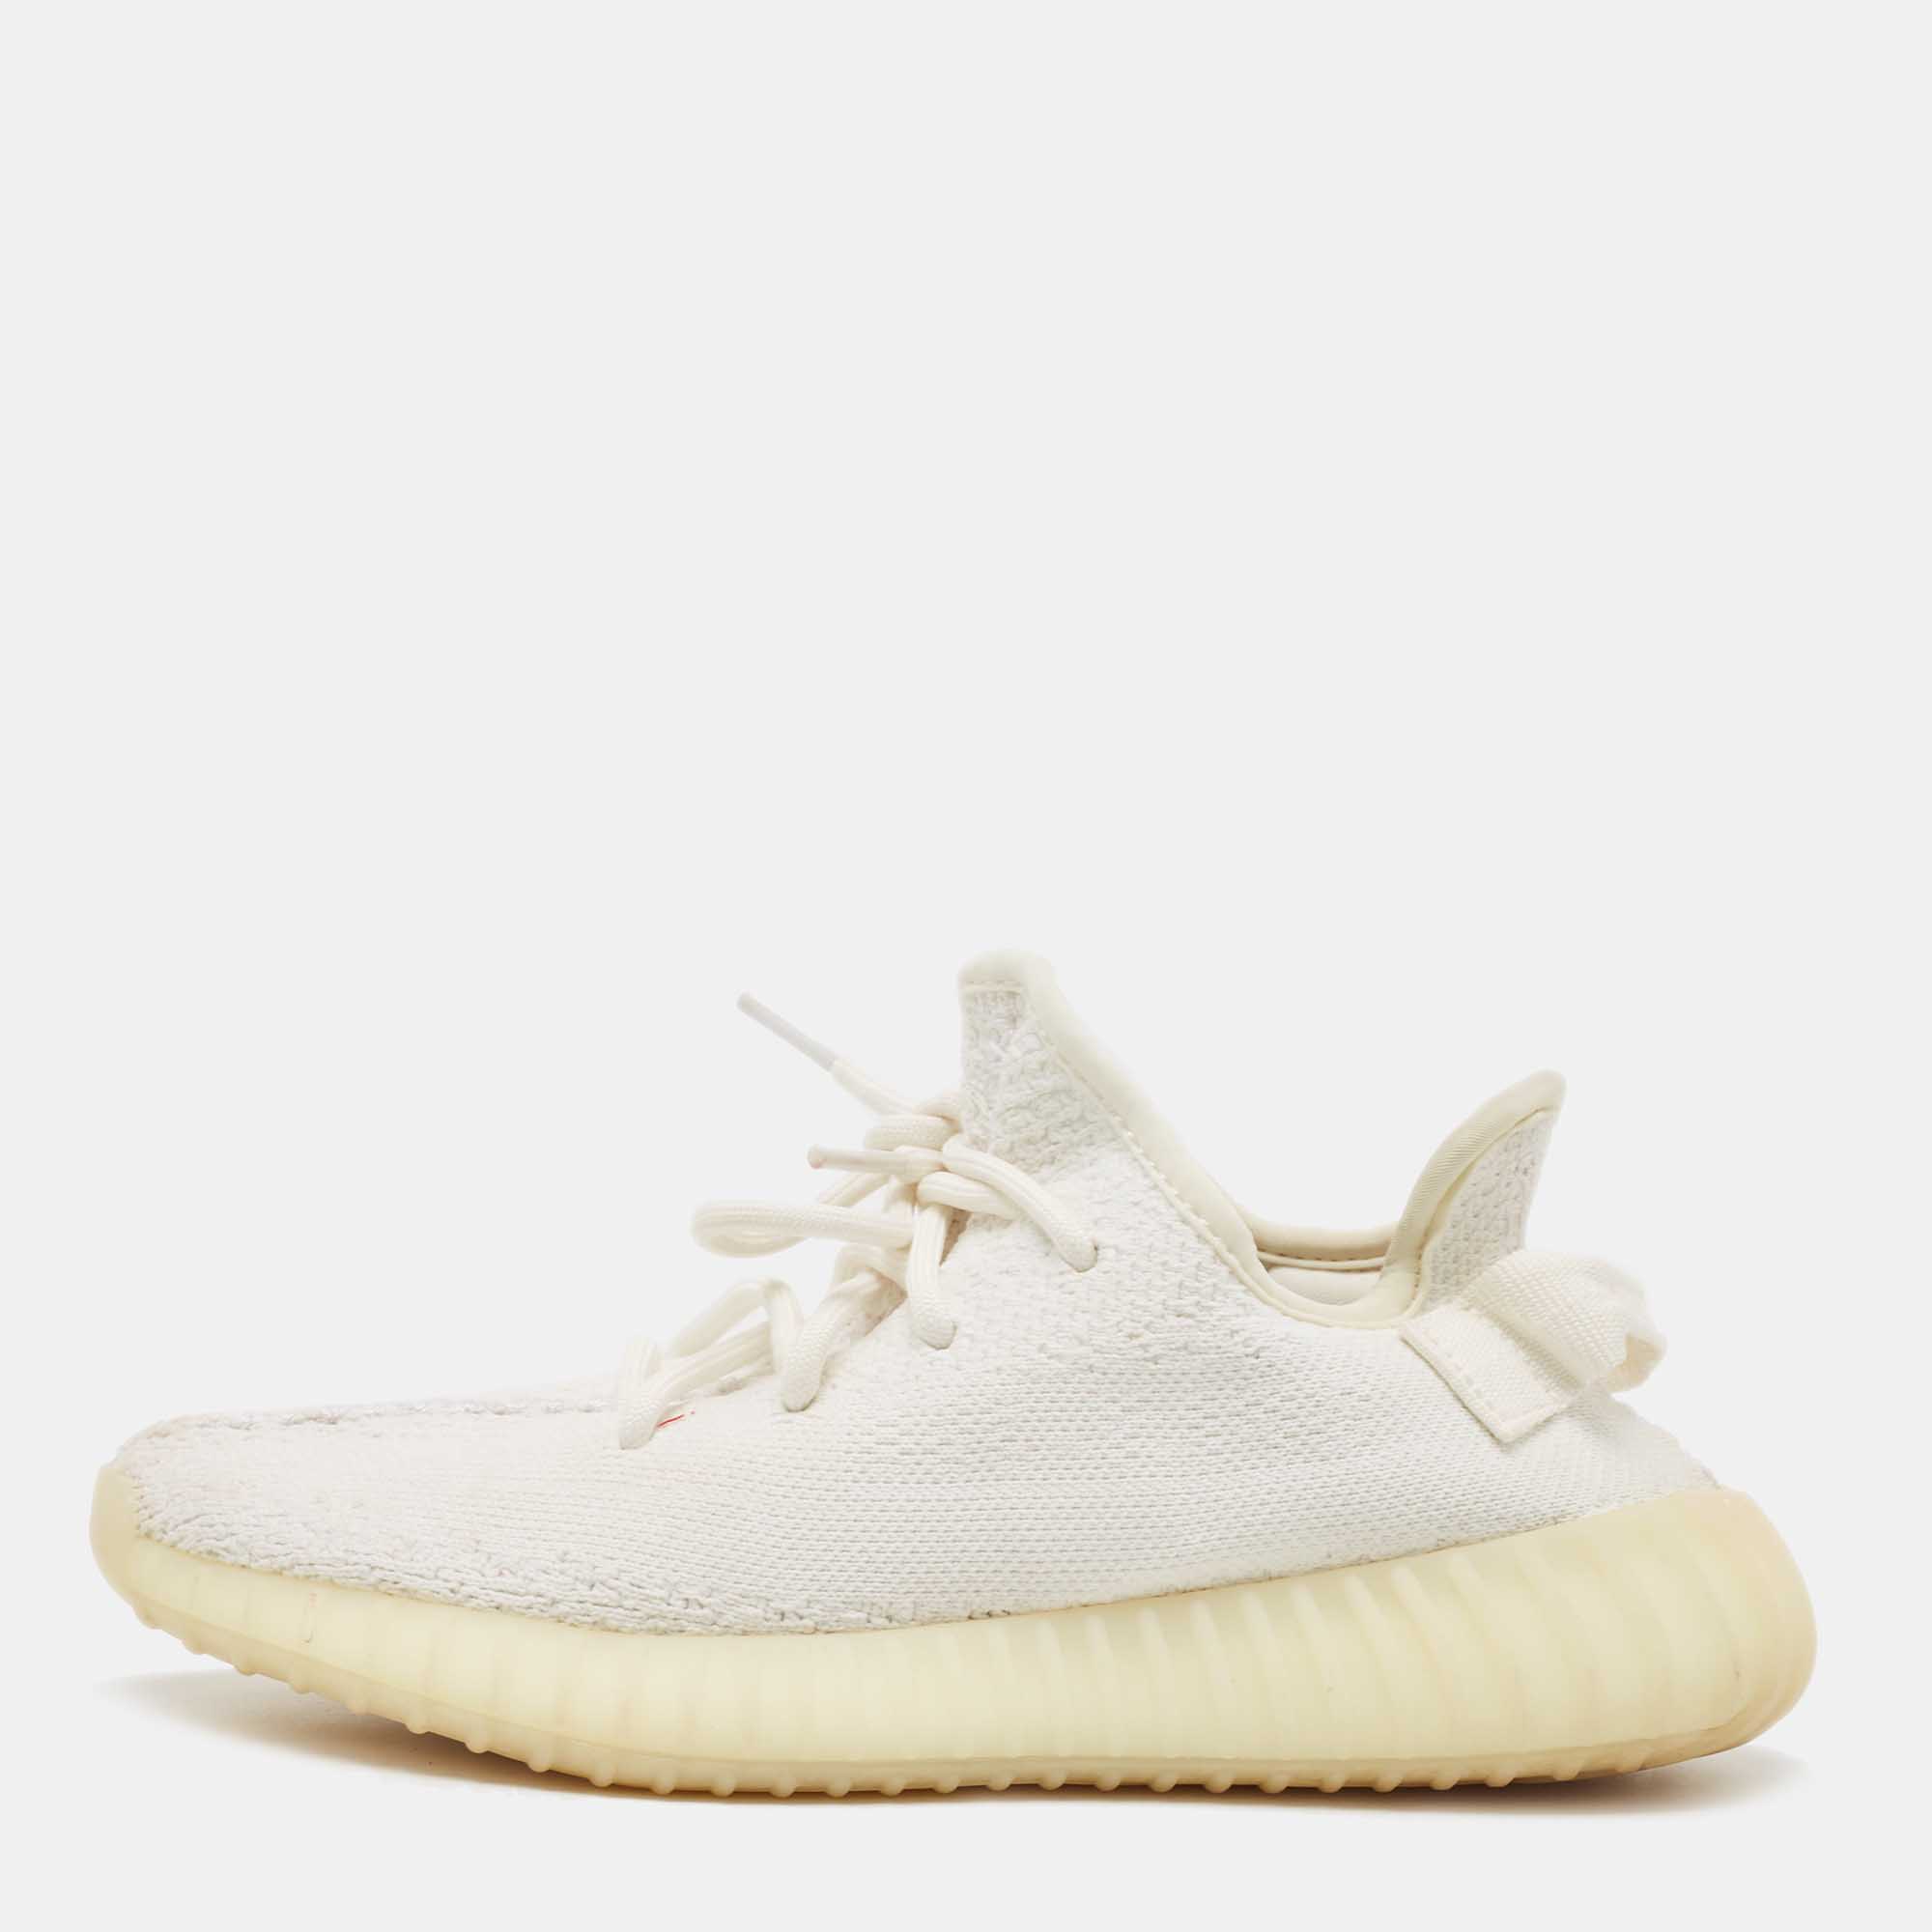 

Yeezy x Adidas Cotton Knit Boost 350 V2 Triple White Sneakers Size FR 37 1/3